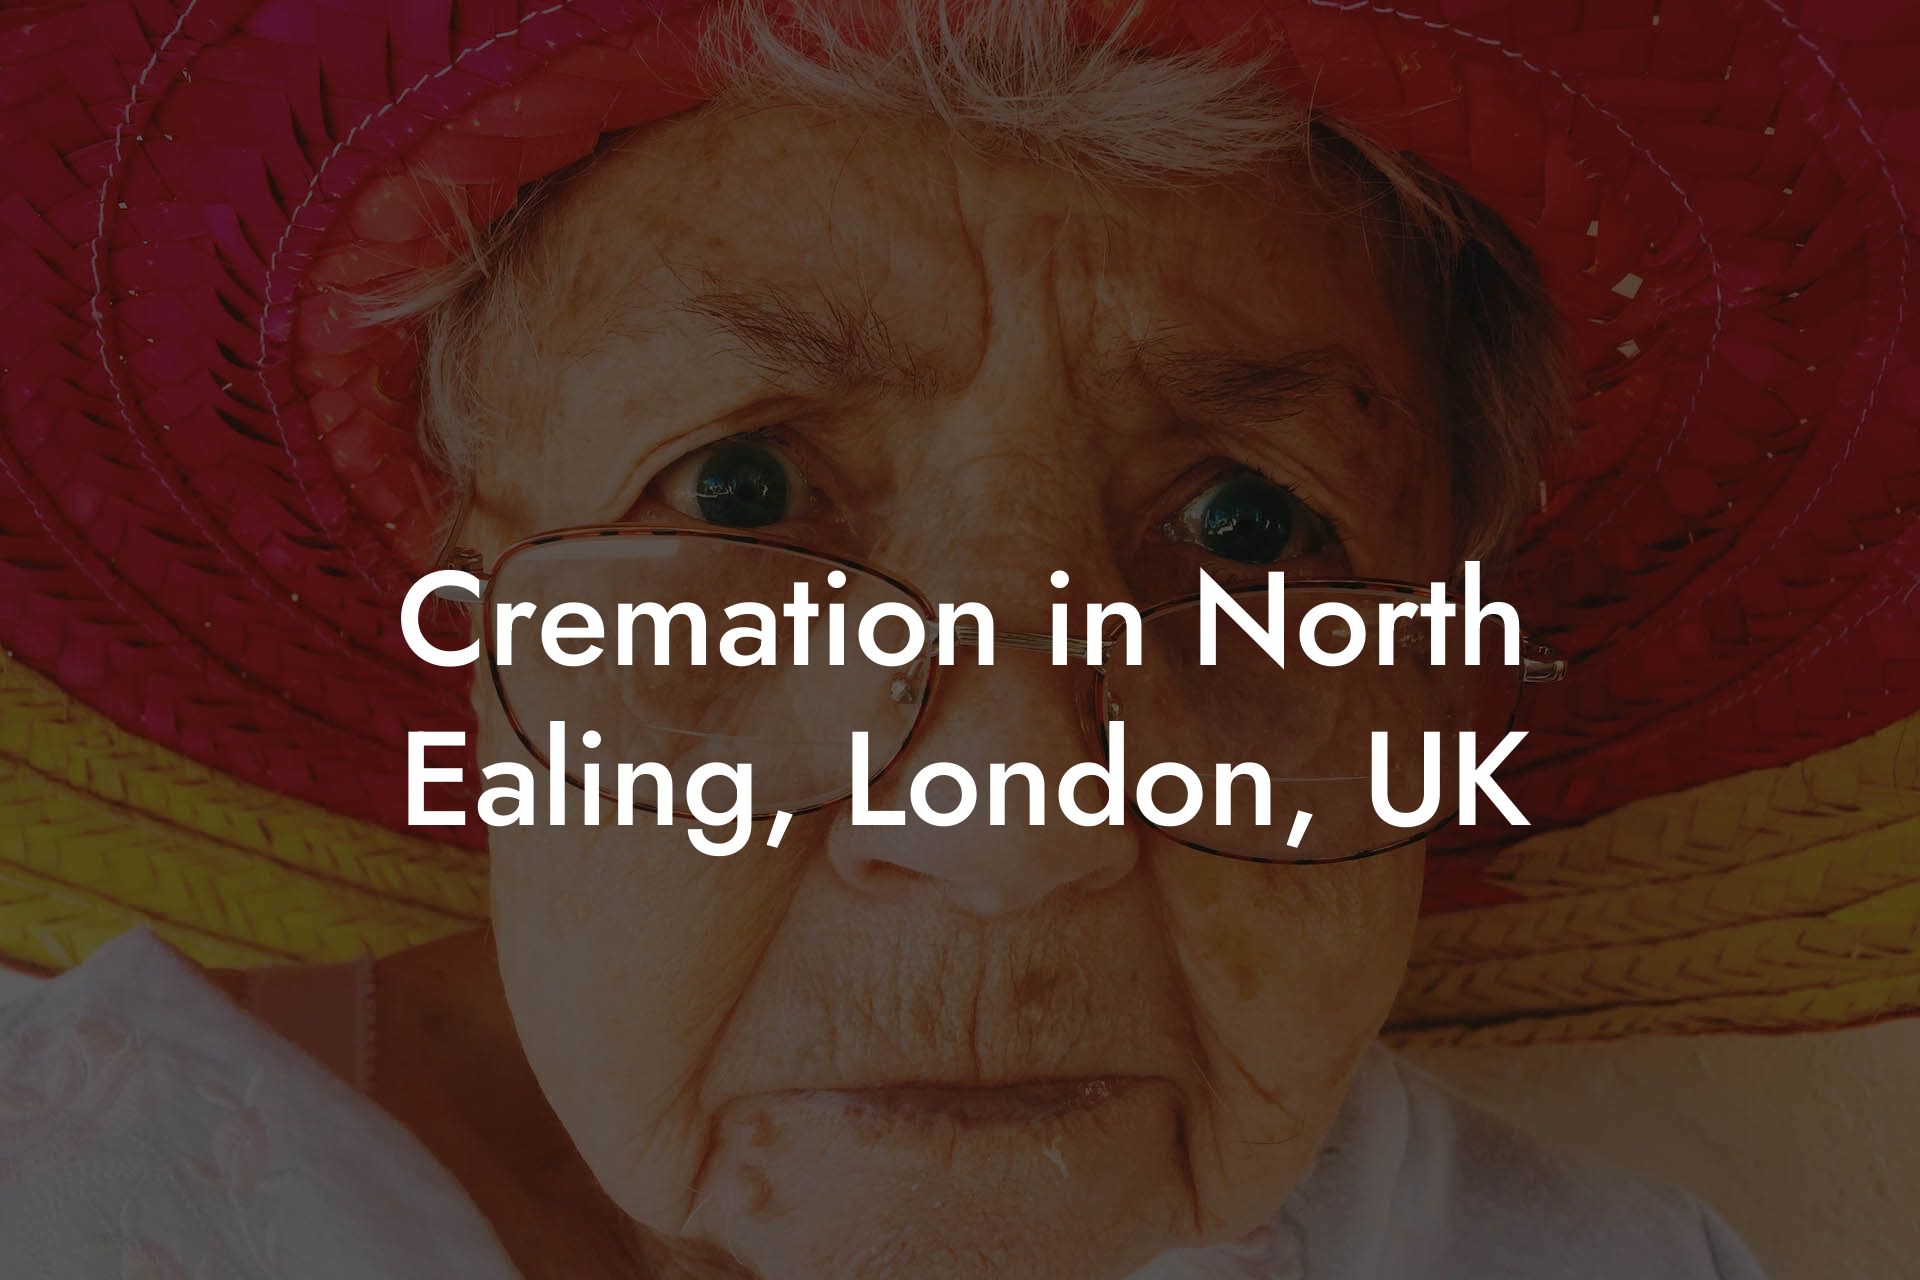 Cremation in North Ealing, London, UK